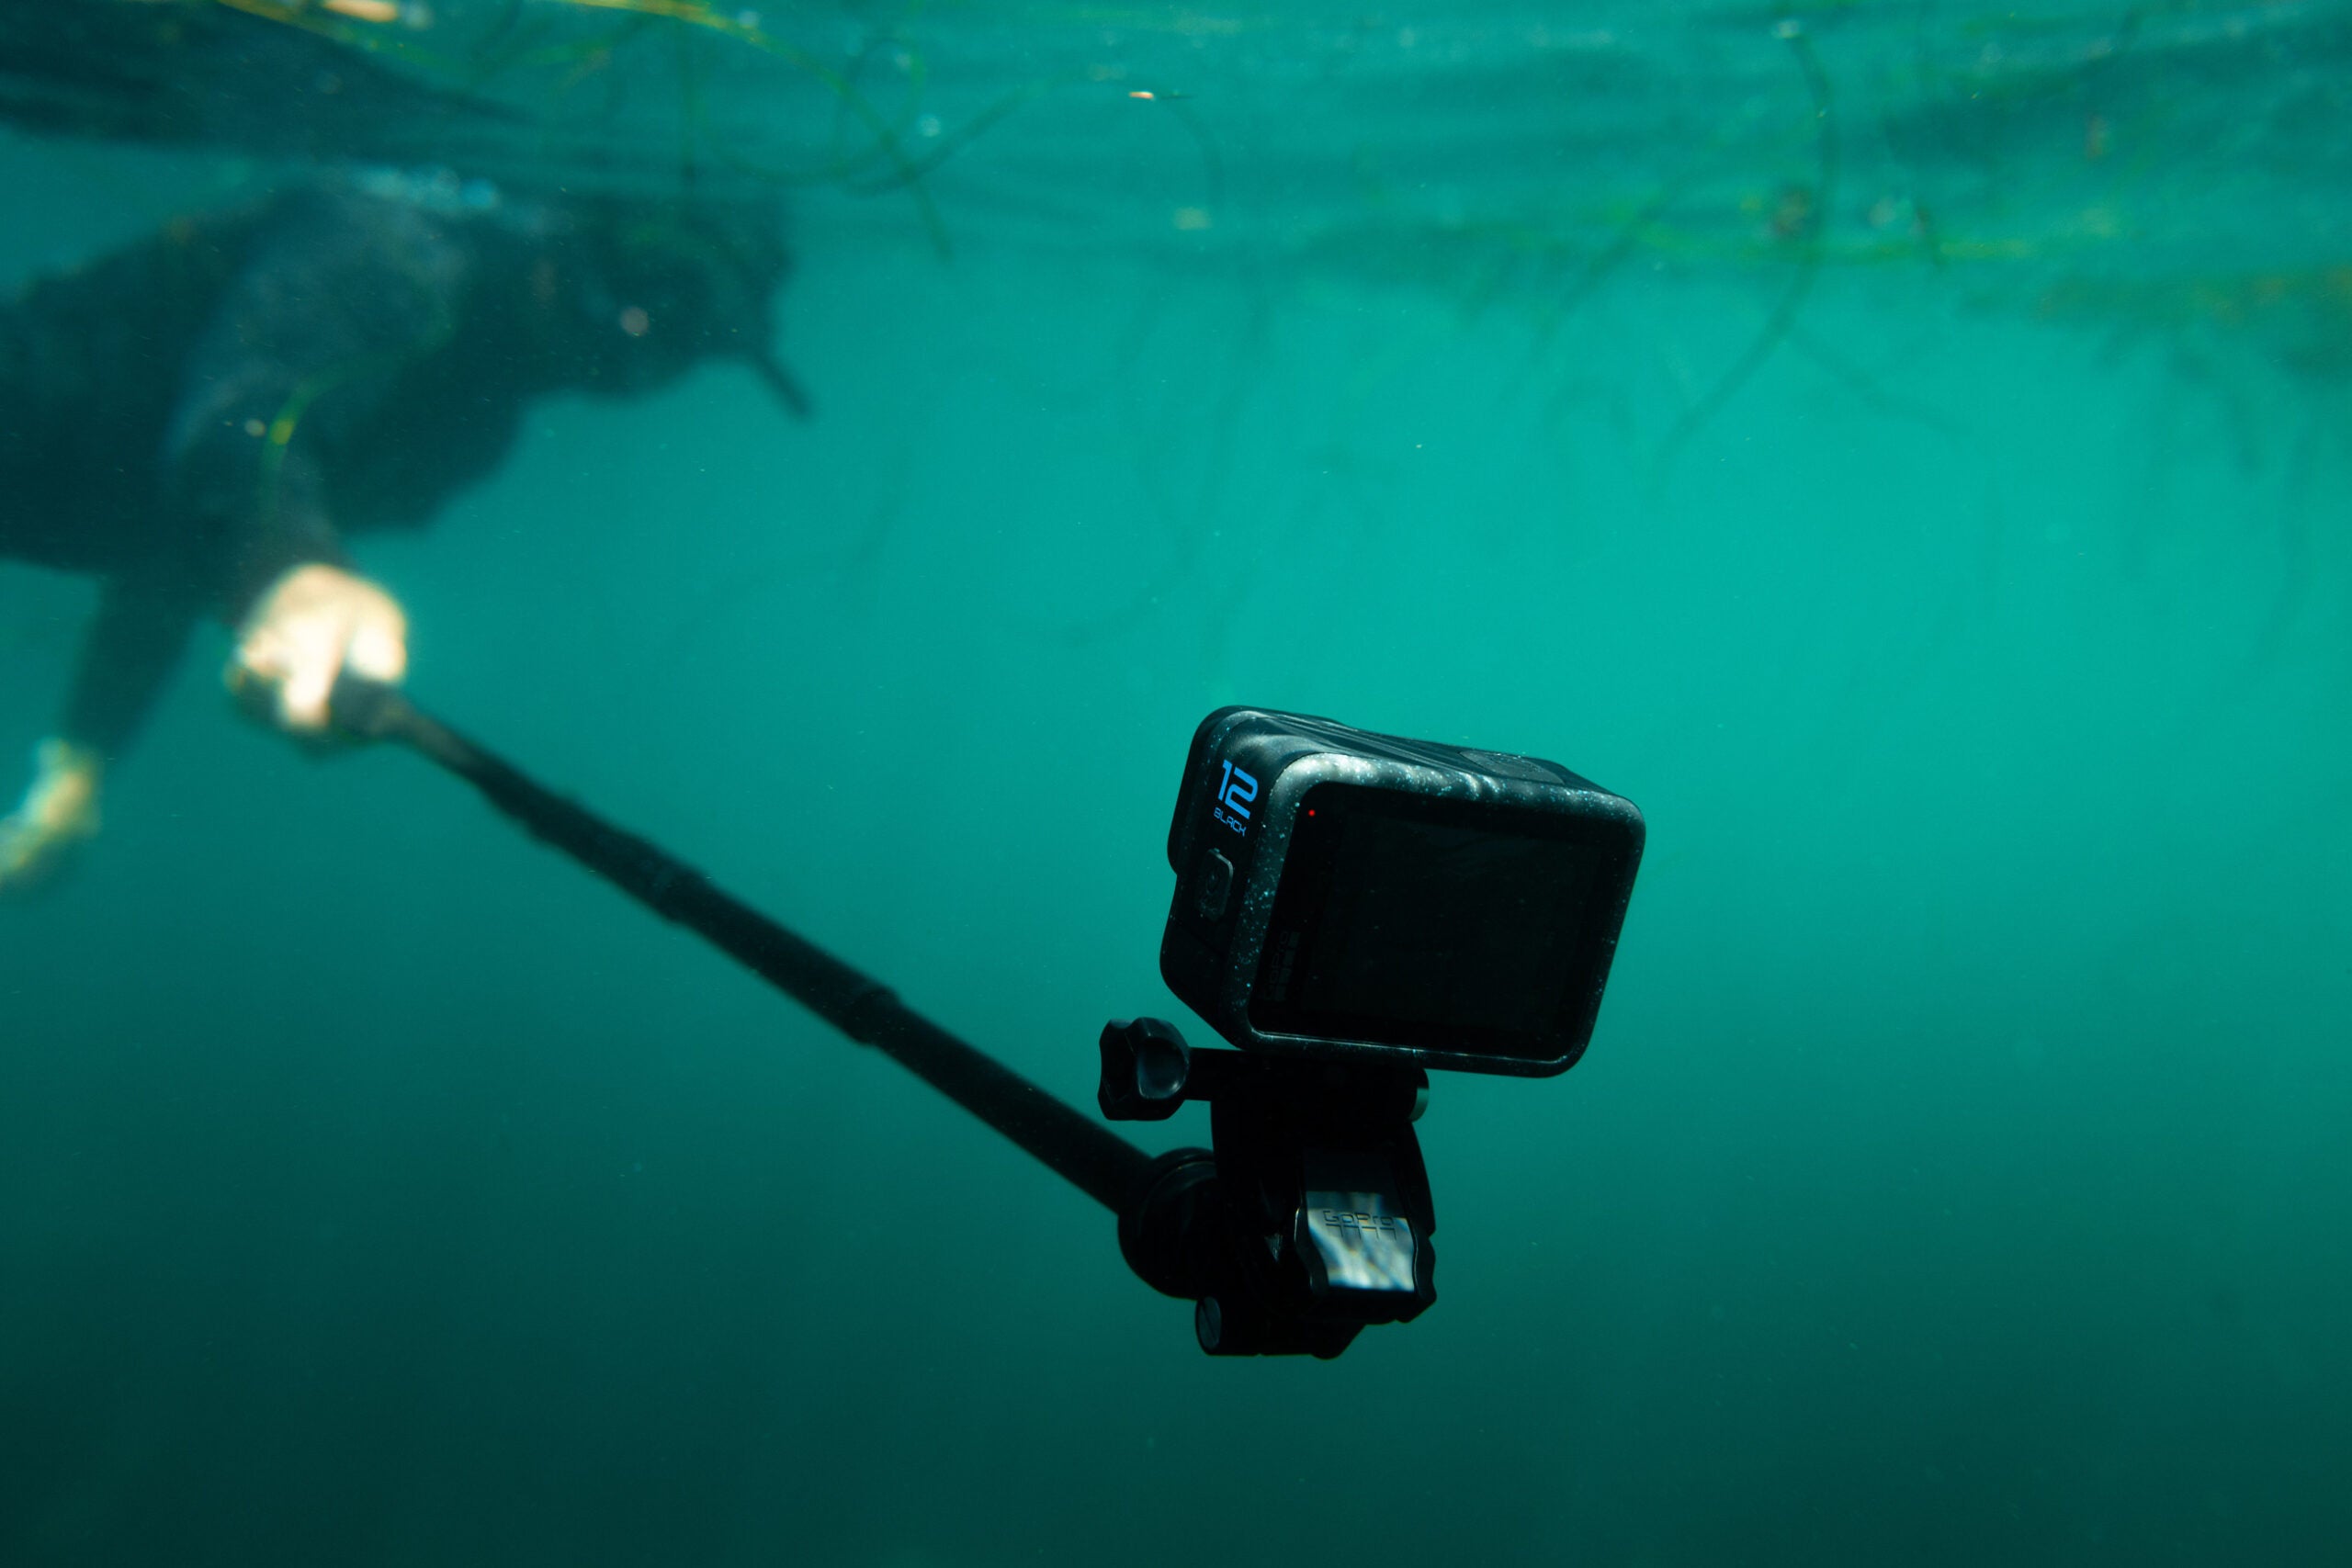 The GoPro Hero12 Black on the new extension pole underwater